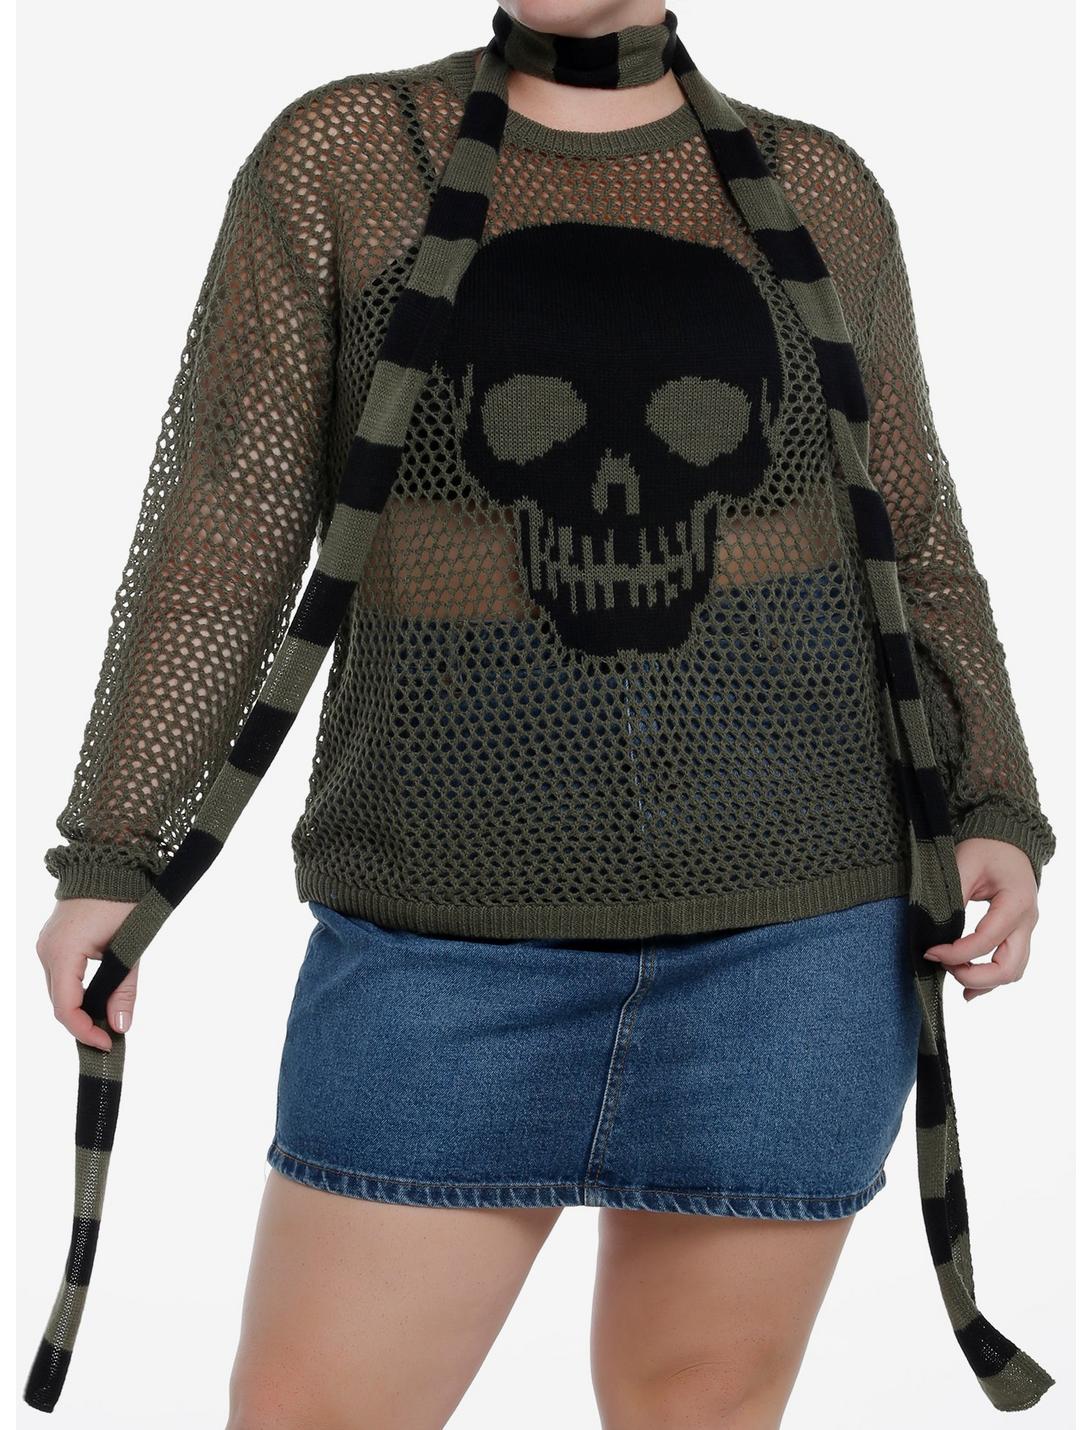 Social Collision Skull Girls Knit Sweater With Scarf Plus Size, BLACK, hi-res